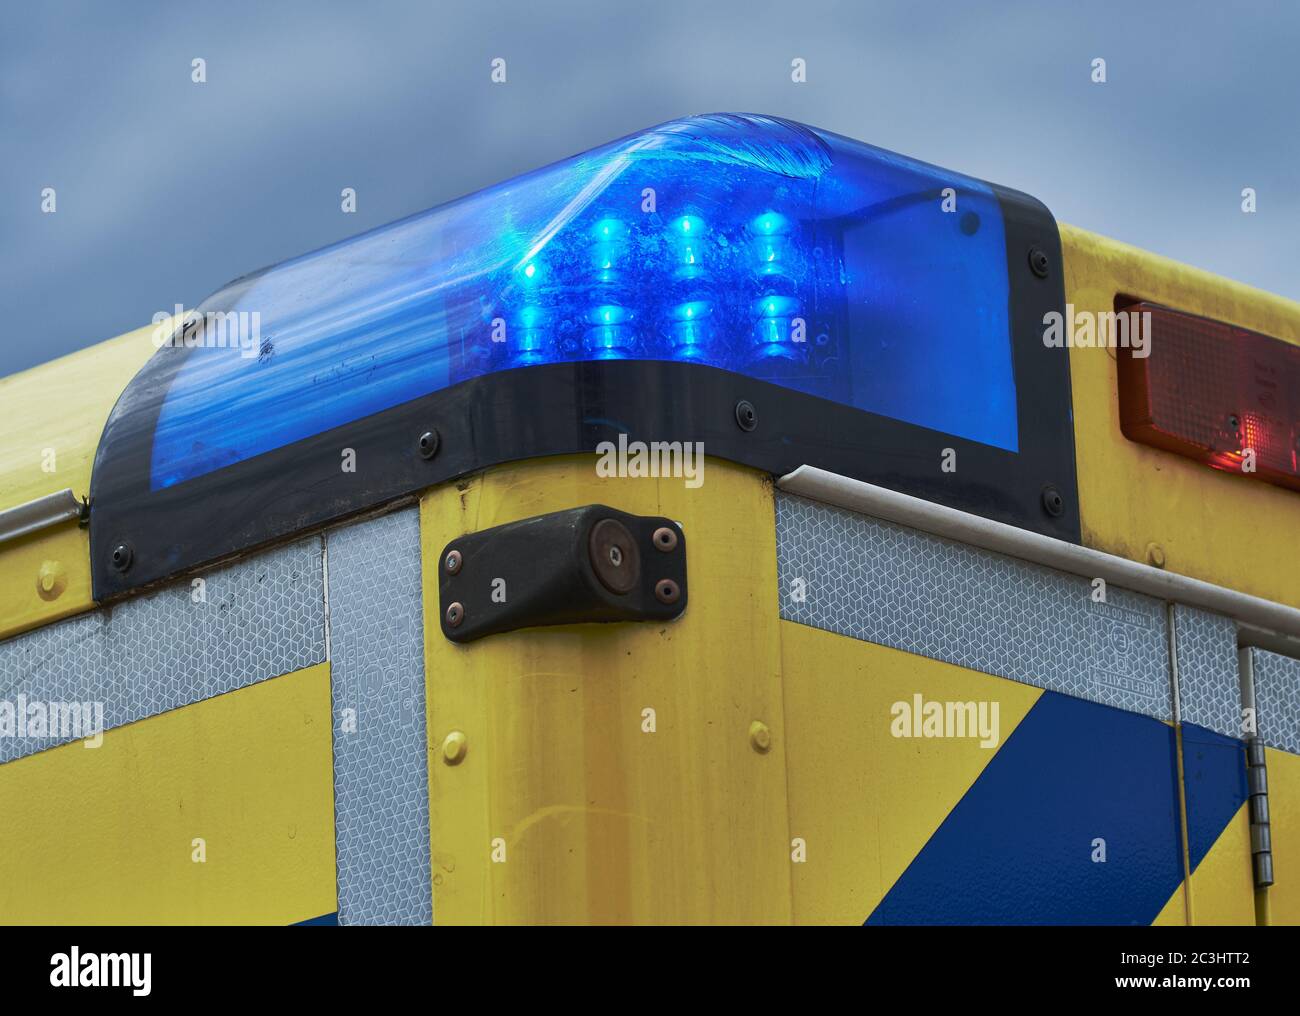 Close-up of a German ambulance van with blue emergency lights switched on against blue sky Stock Photo